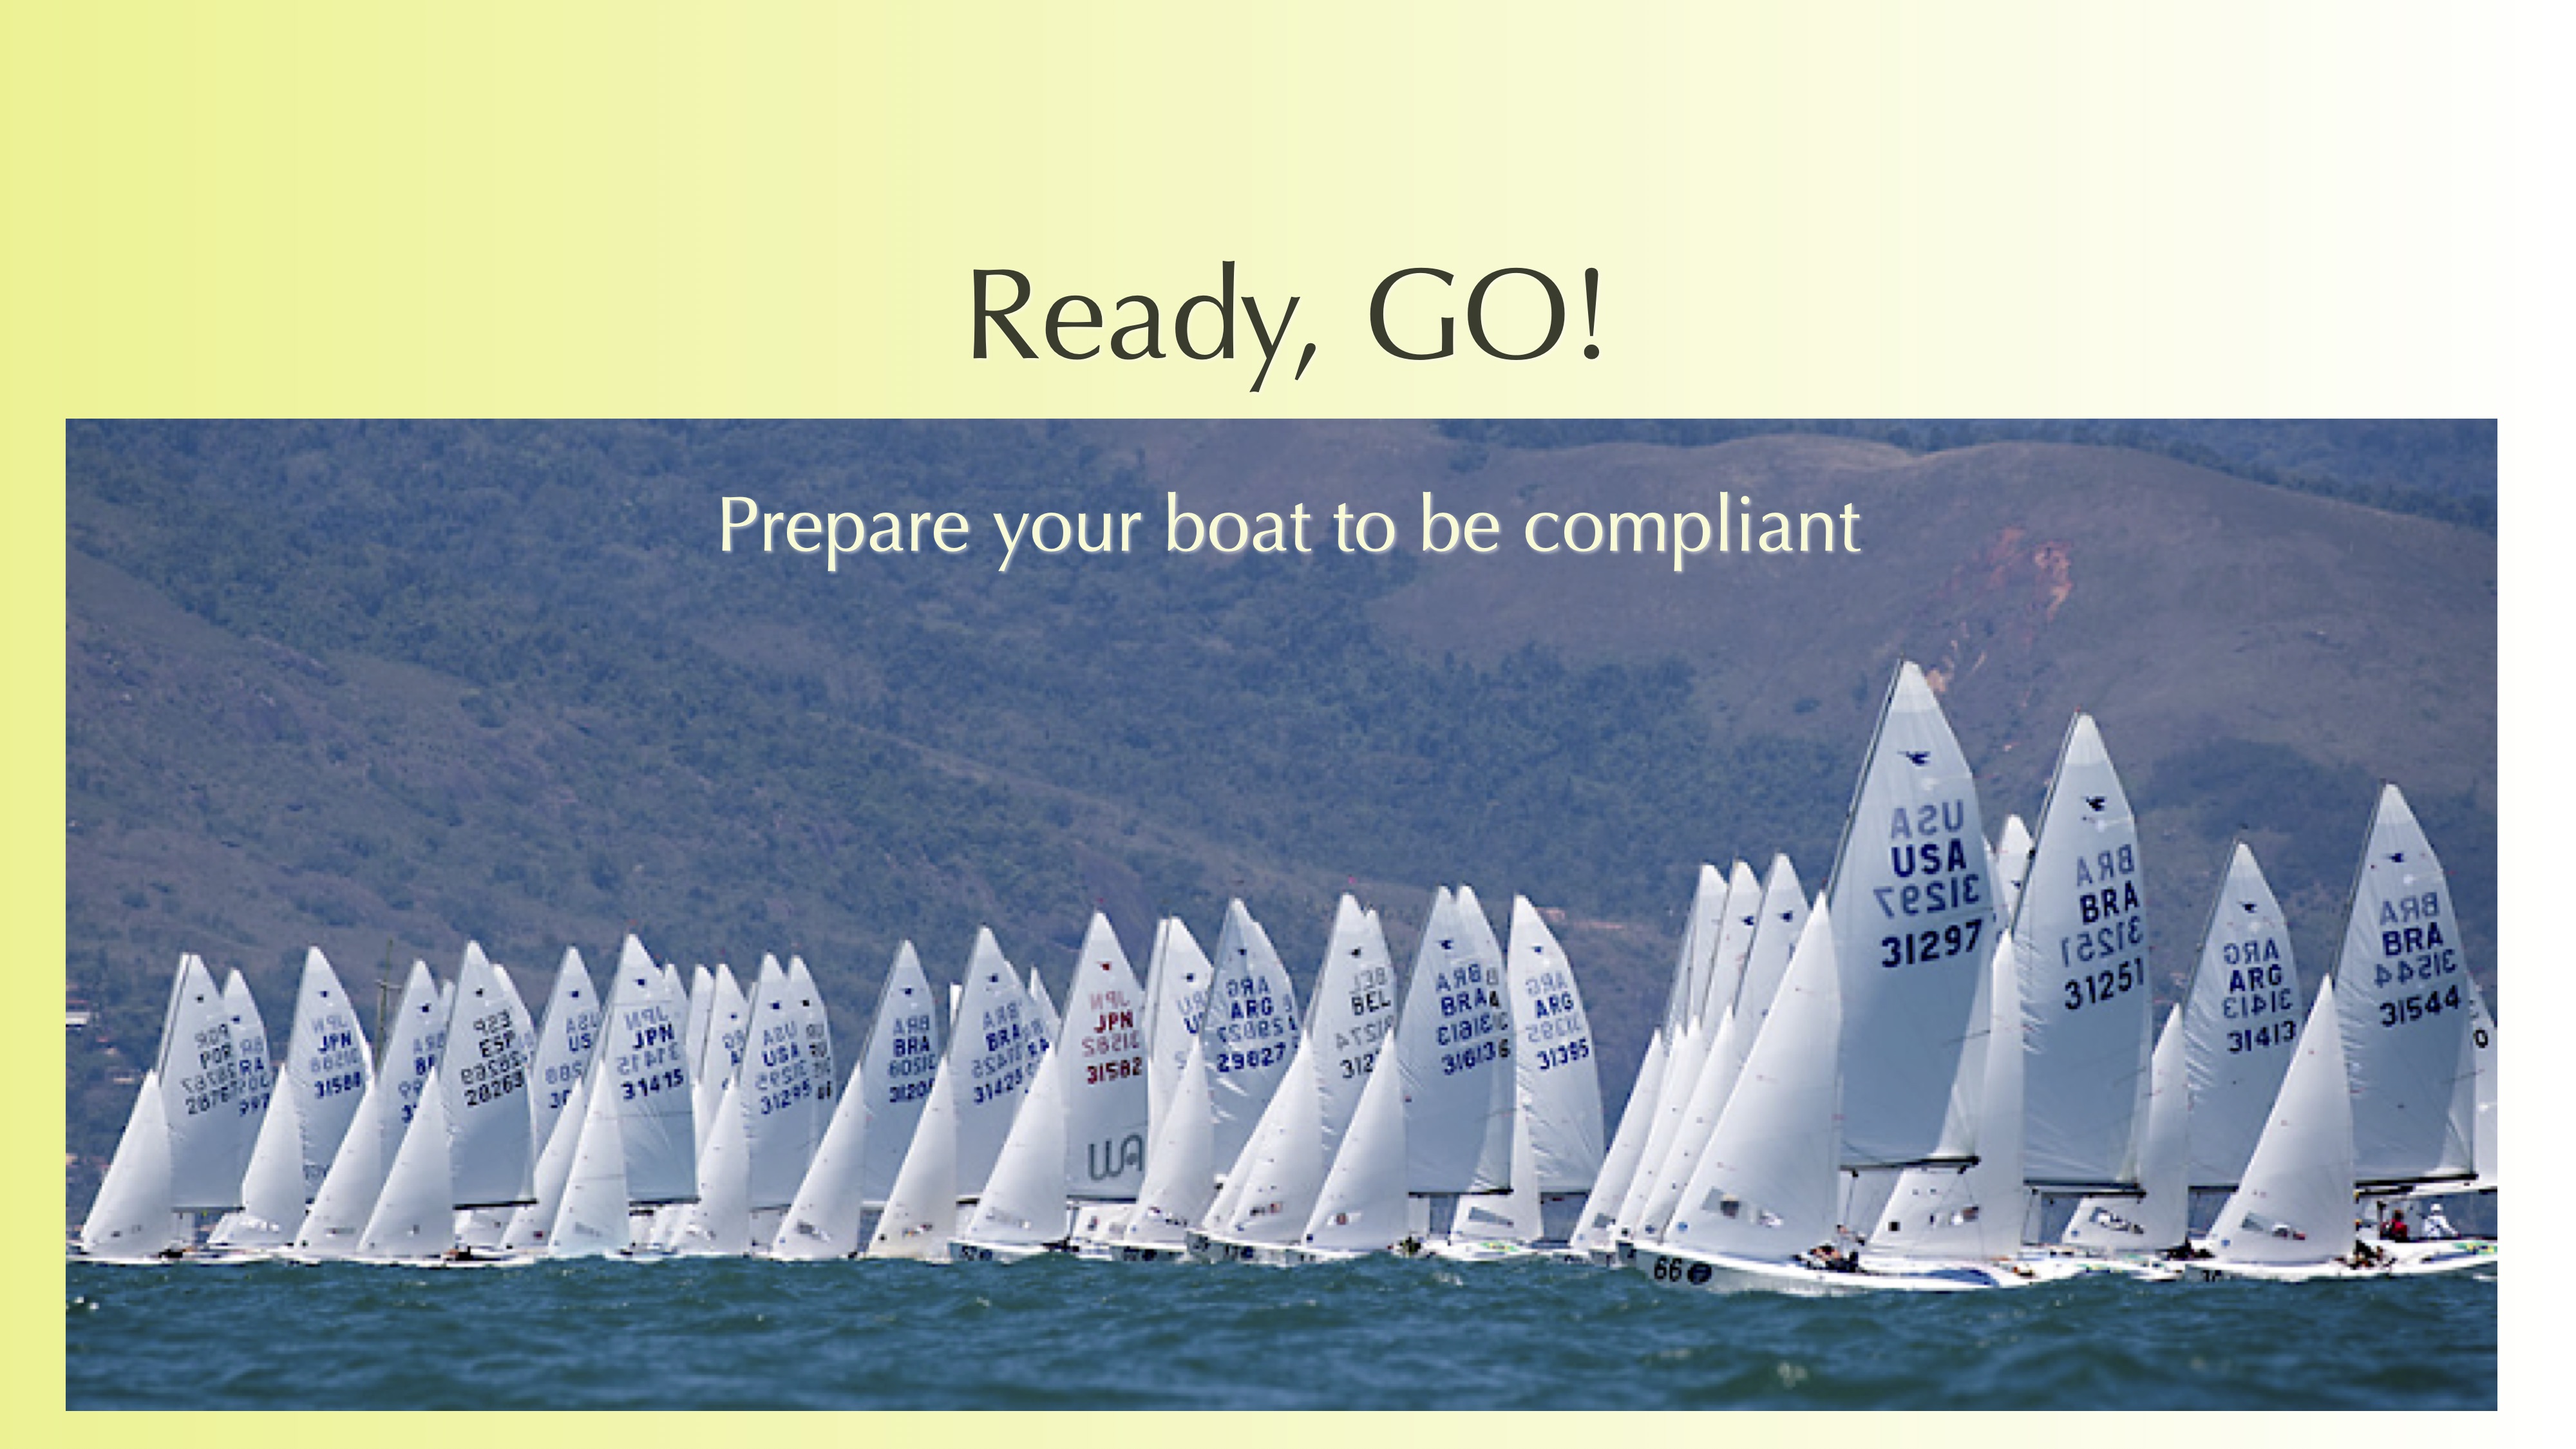 Ready, GO! Prepare your boat to be compliant Image